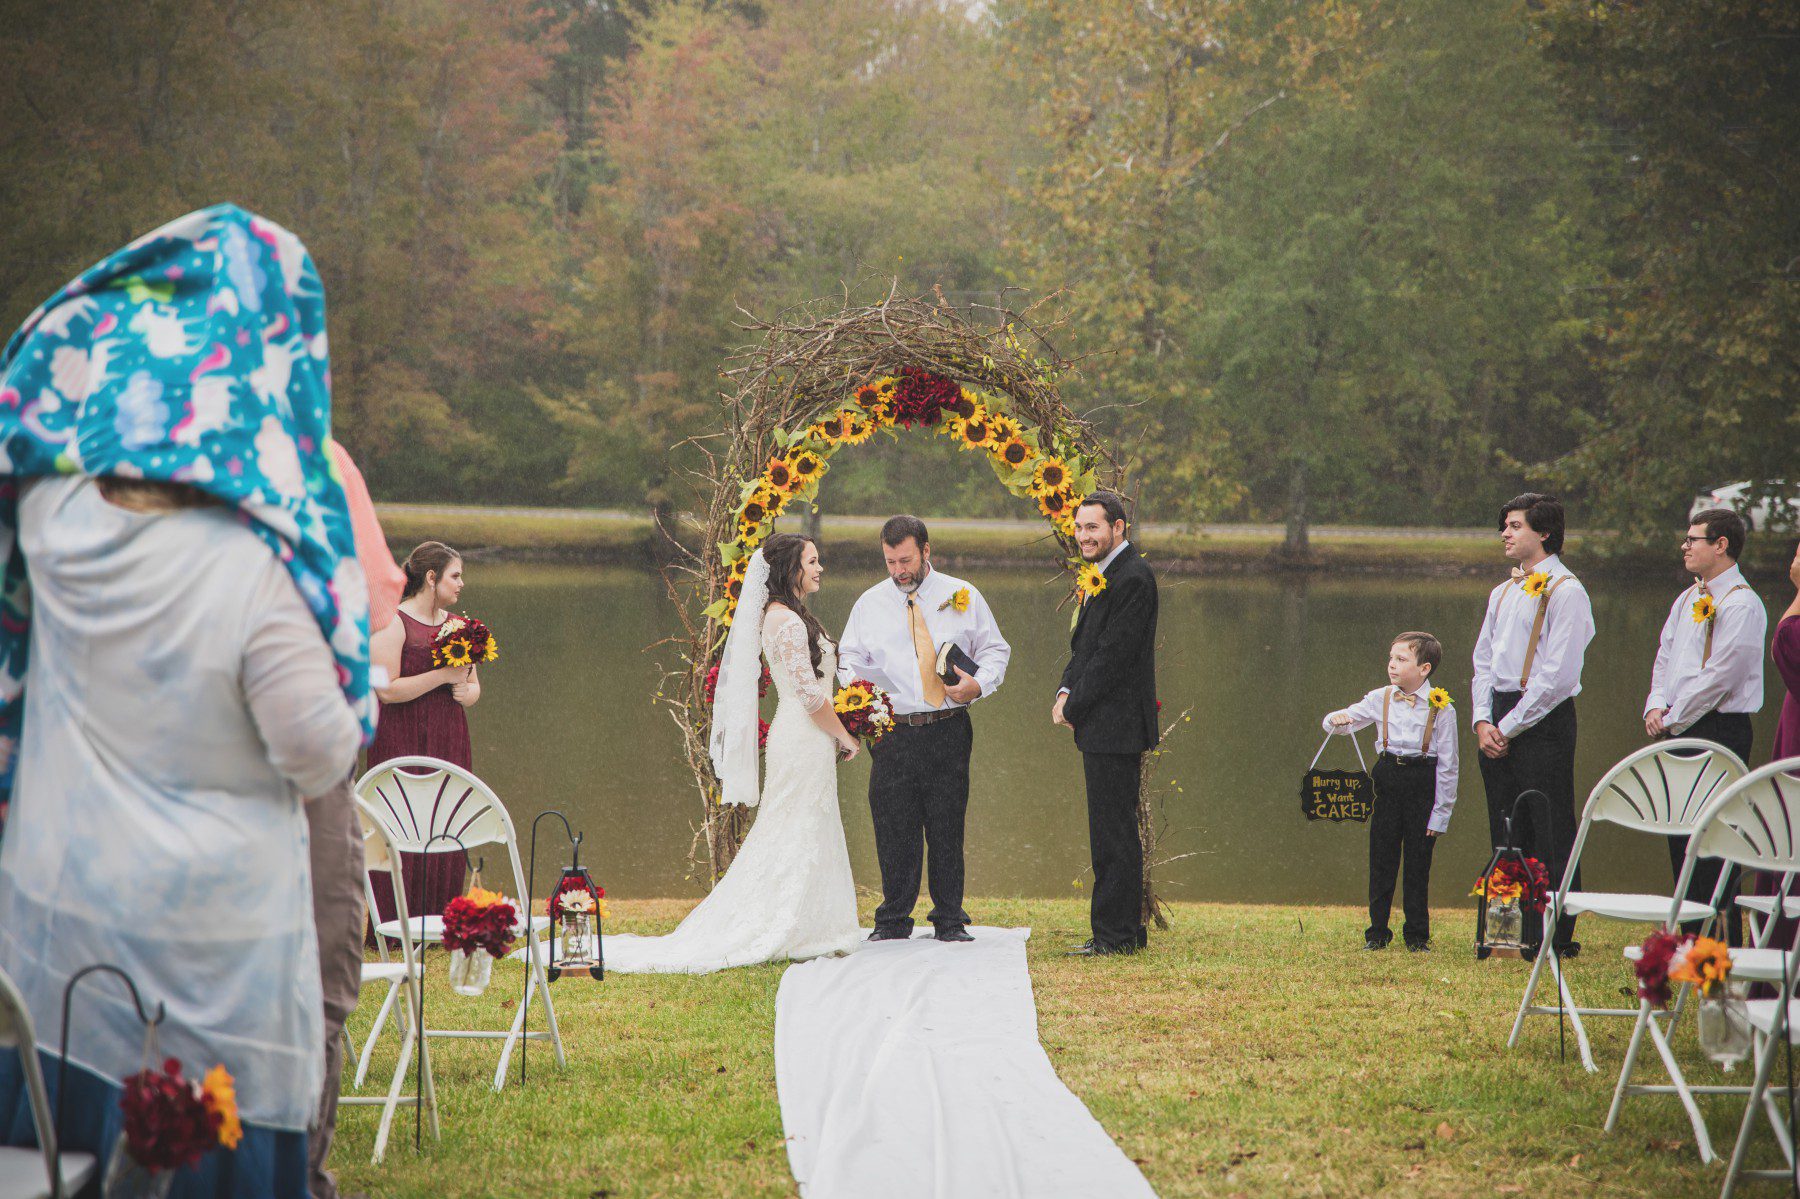 rainy day outdoor wedding ceremony Clearview Church of Christ Lyles, TN 